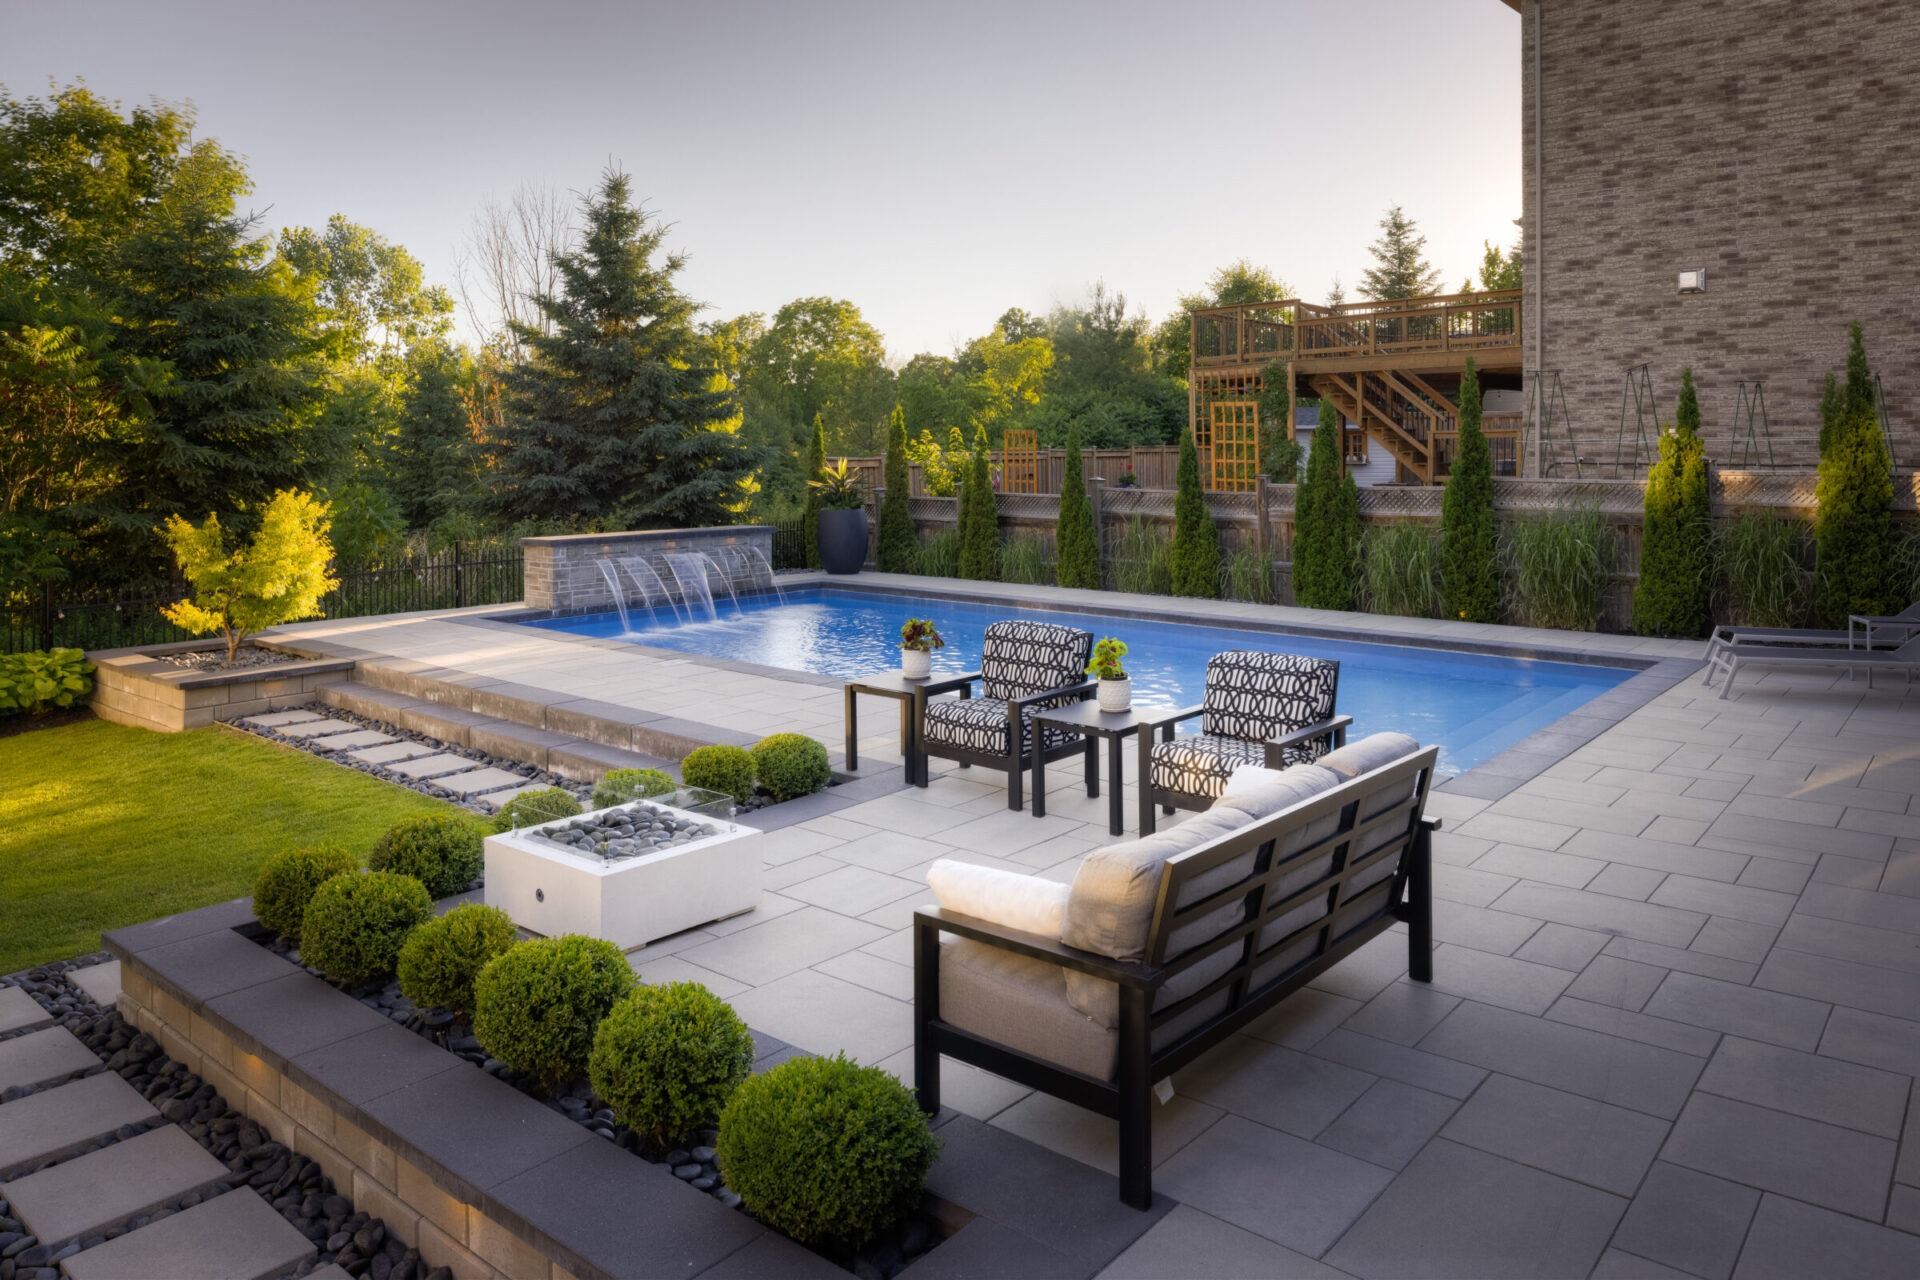 A well-landscaped backyard with a swimming pool, water feature, patio furniture, neatly trimmed bushes, and a wooden deck amid lush greenery and clear skies.